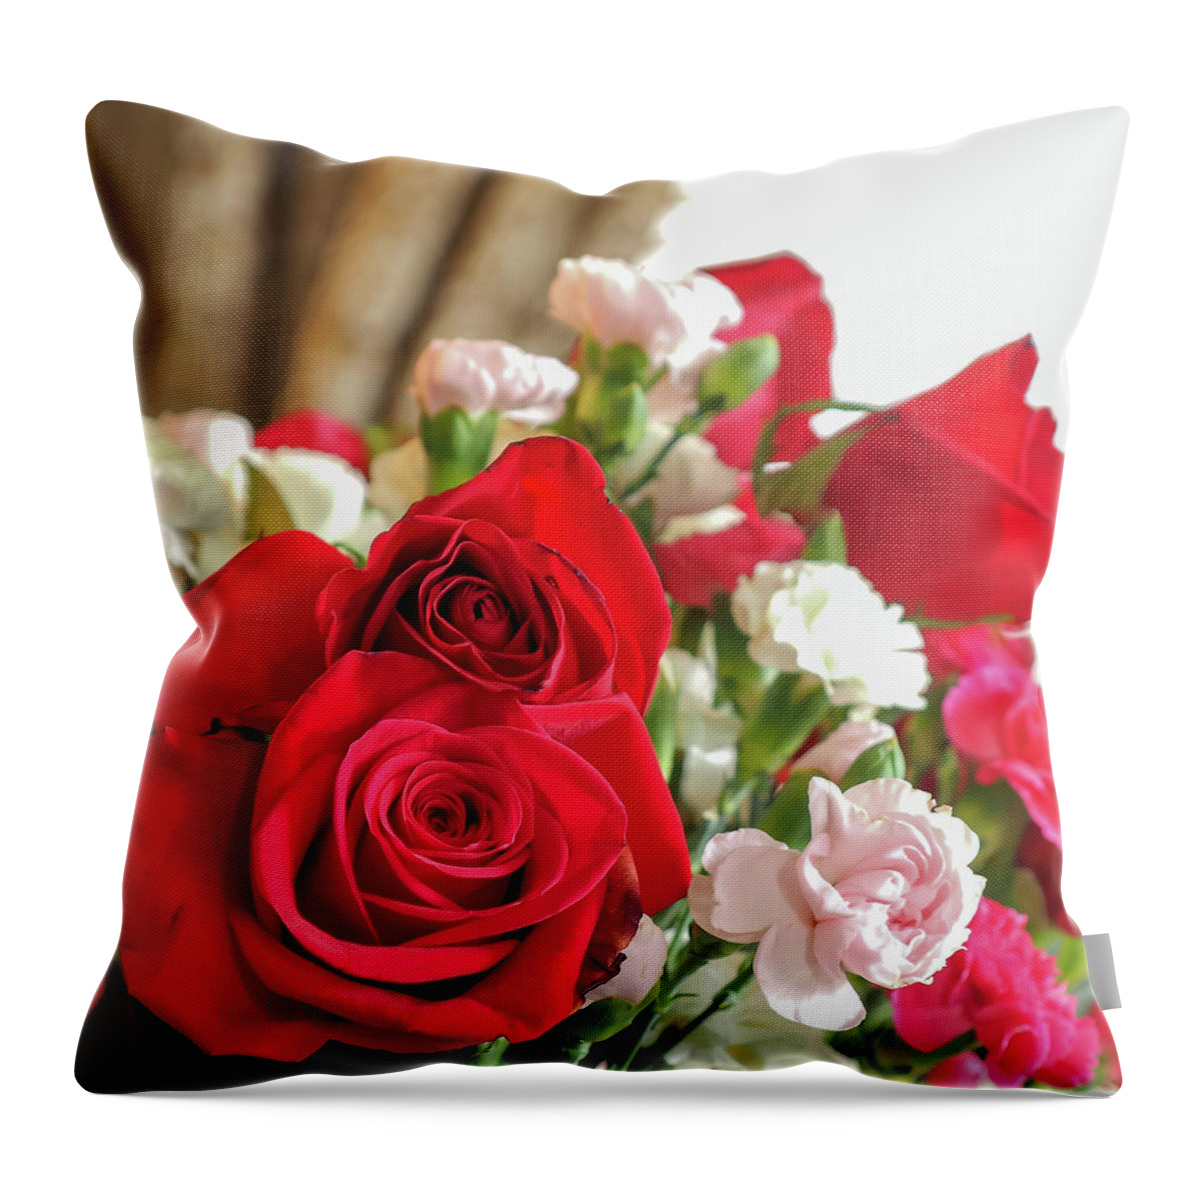 Roses Throw Pillow featuring the photograph Roses 11 by C Winslow Shafer